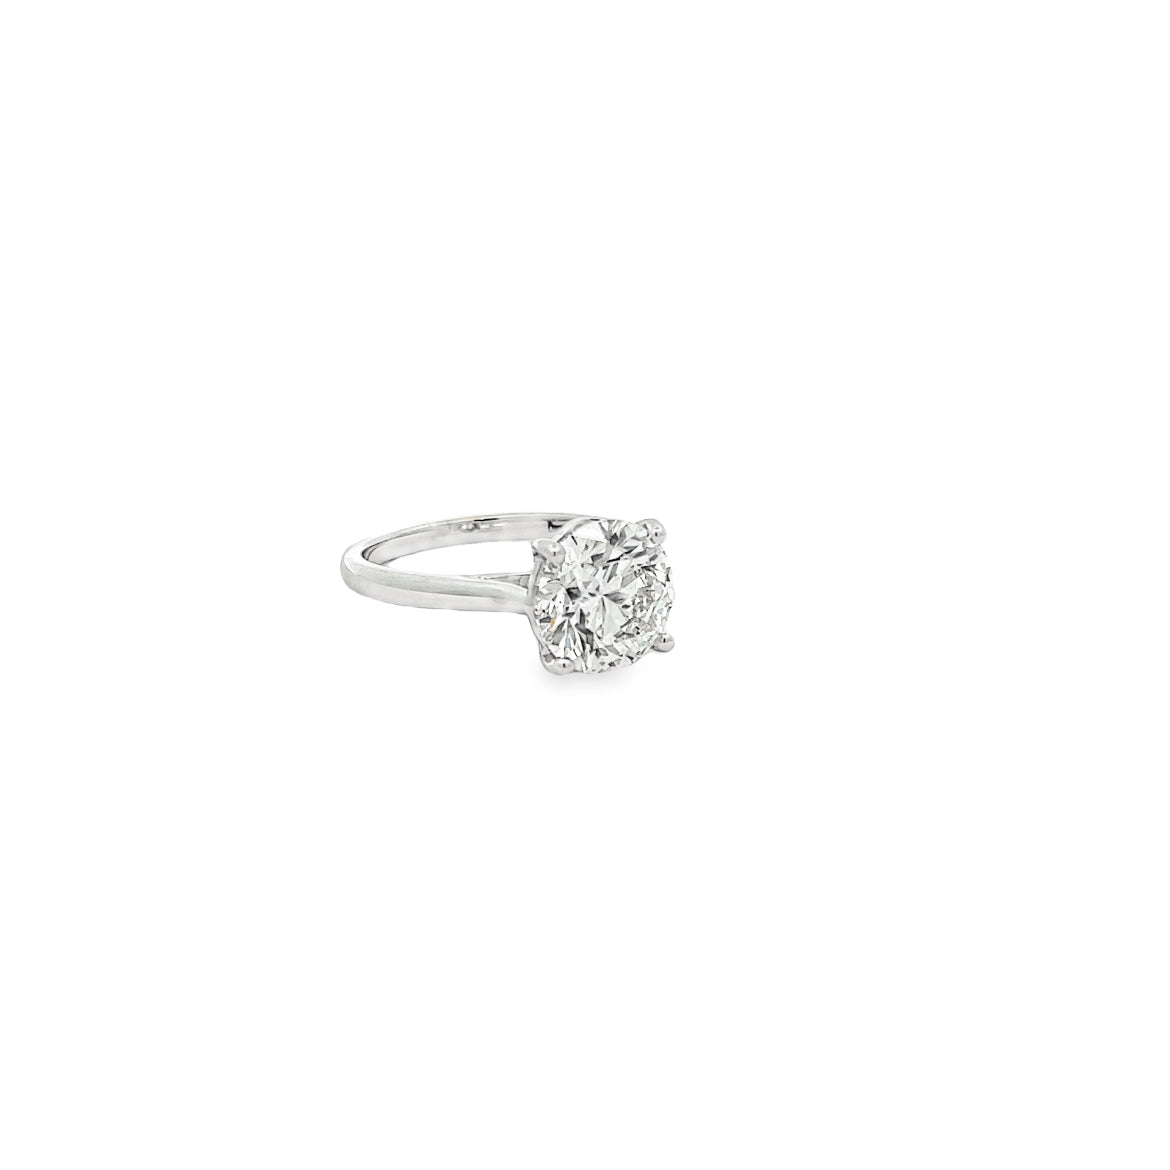 The Davenport 18K White Gold Round Solitaire Engagement Ring